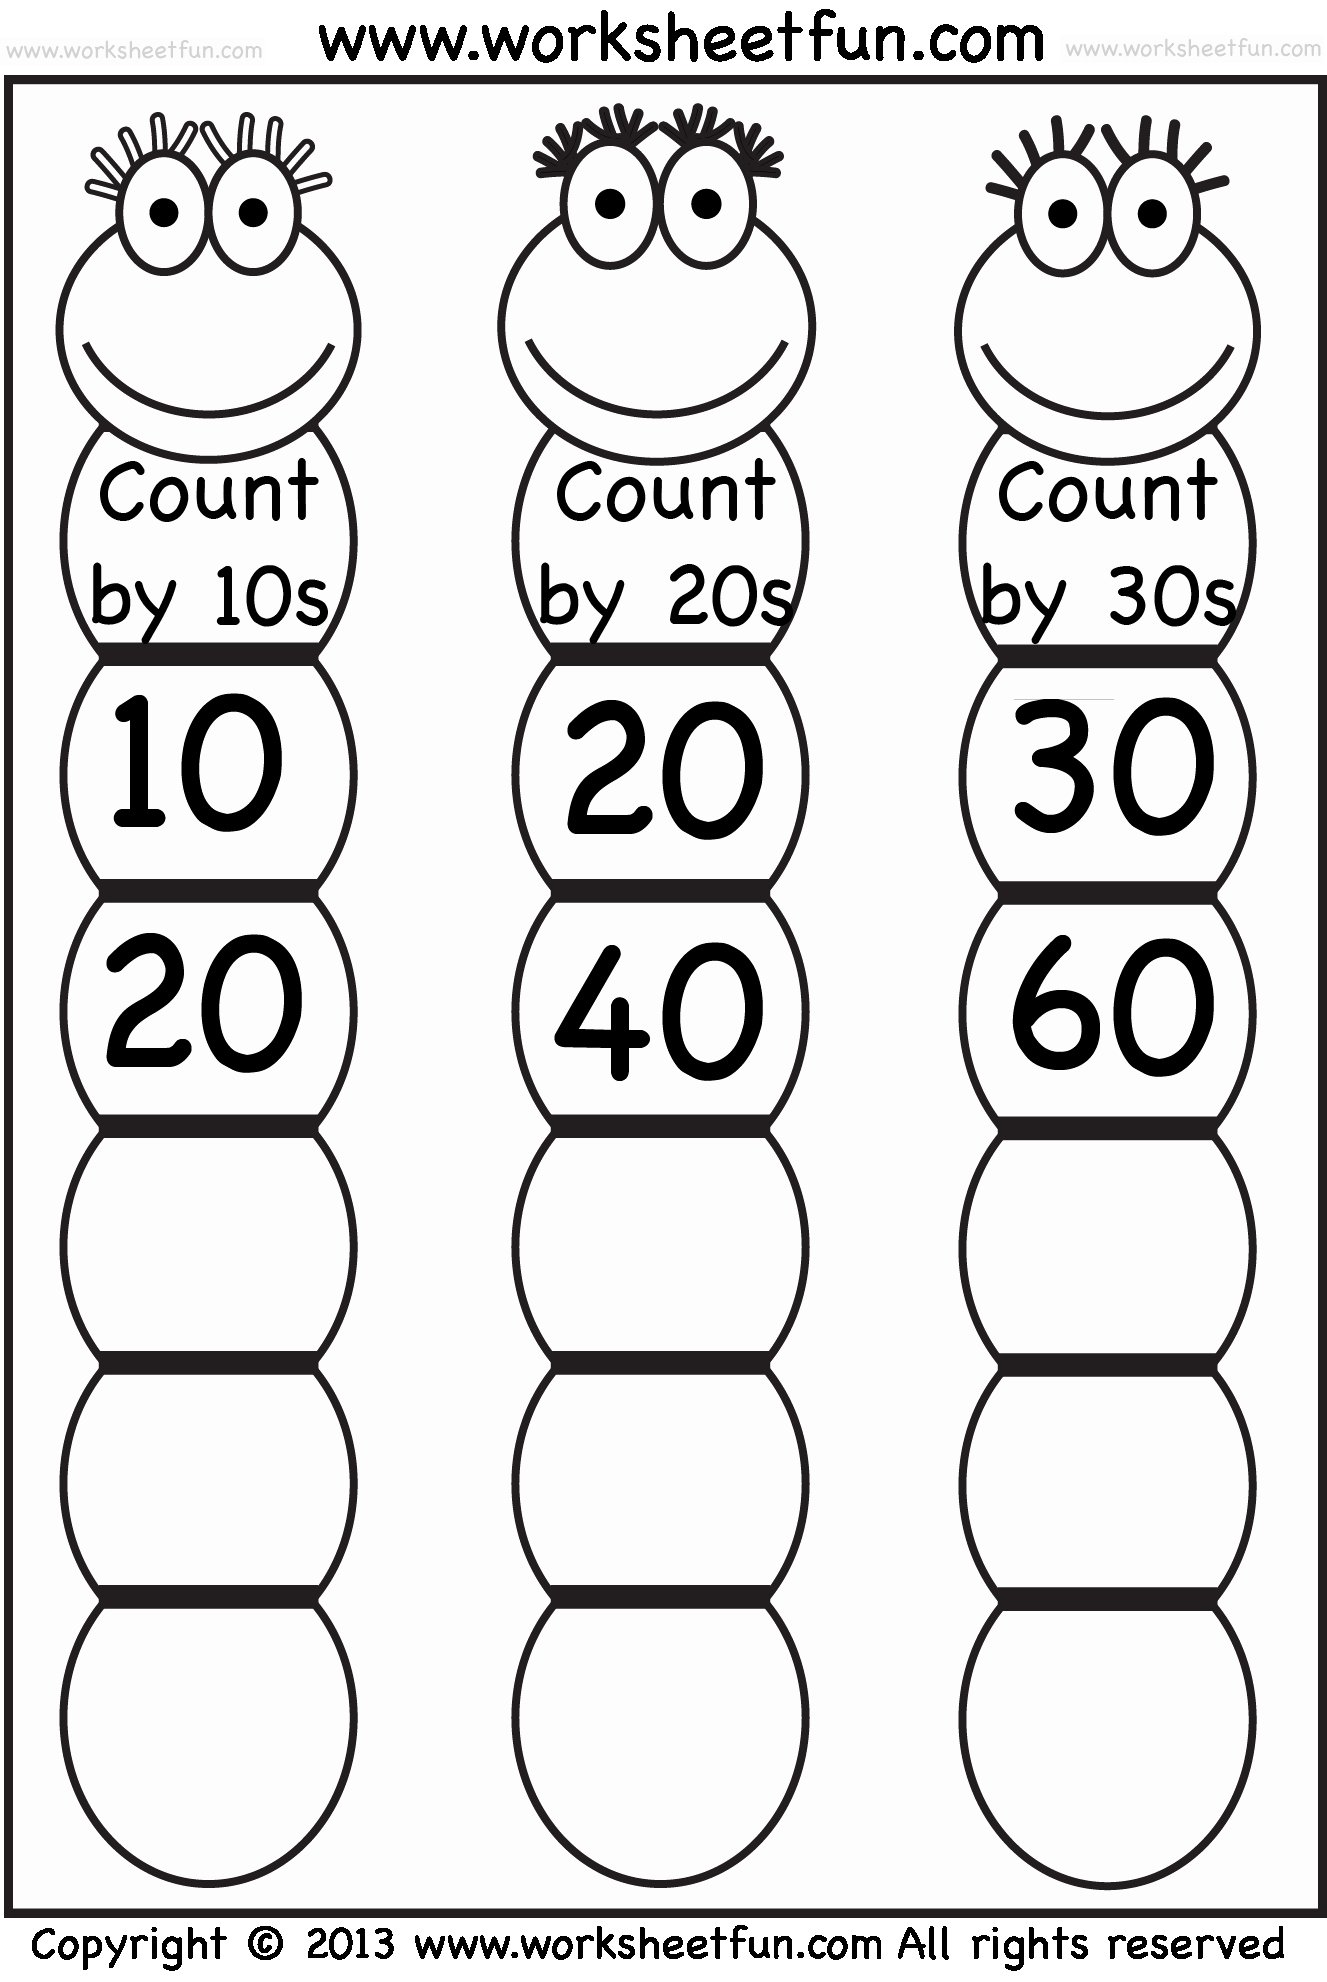 Counting by 10s Worksheet Elegant Skip Counting by 10 20 and 30 – Worksheet Free